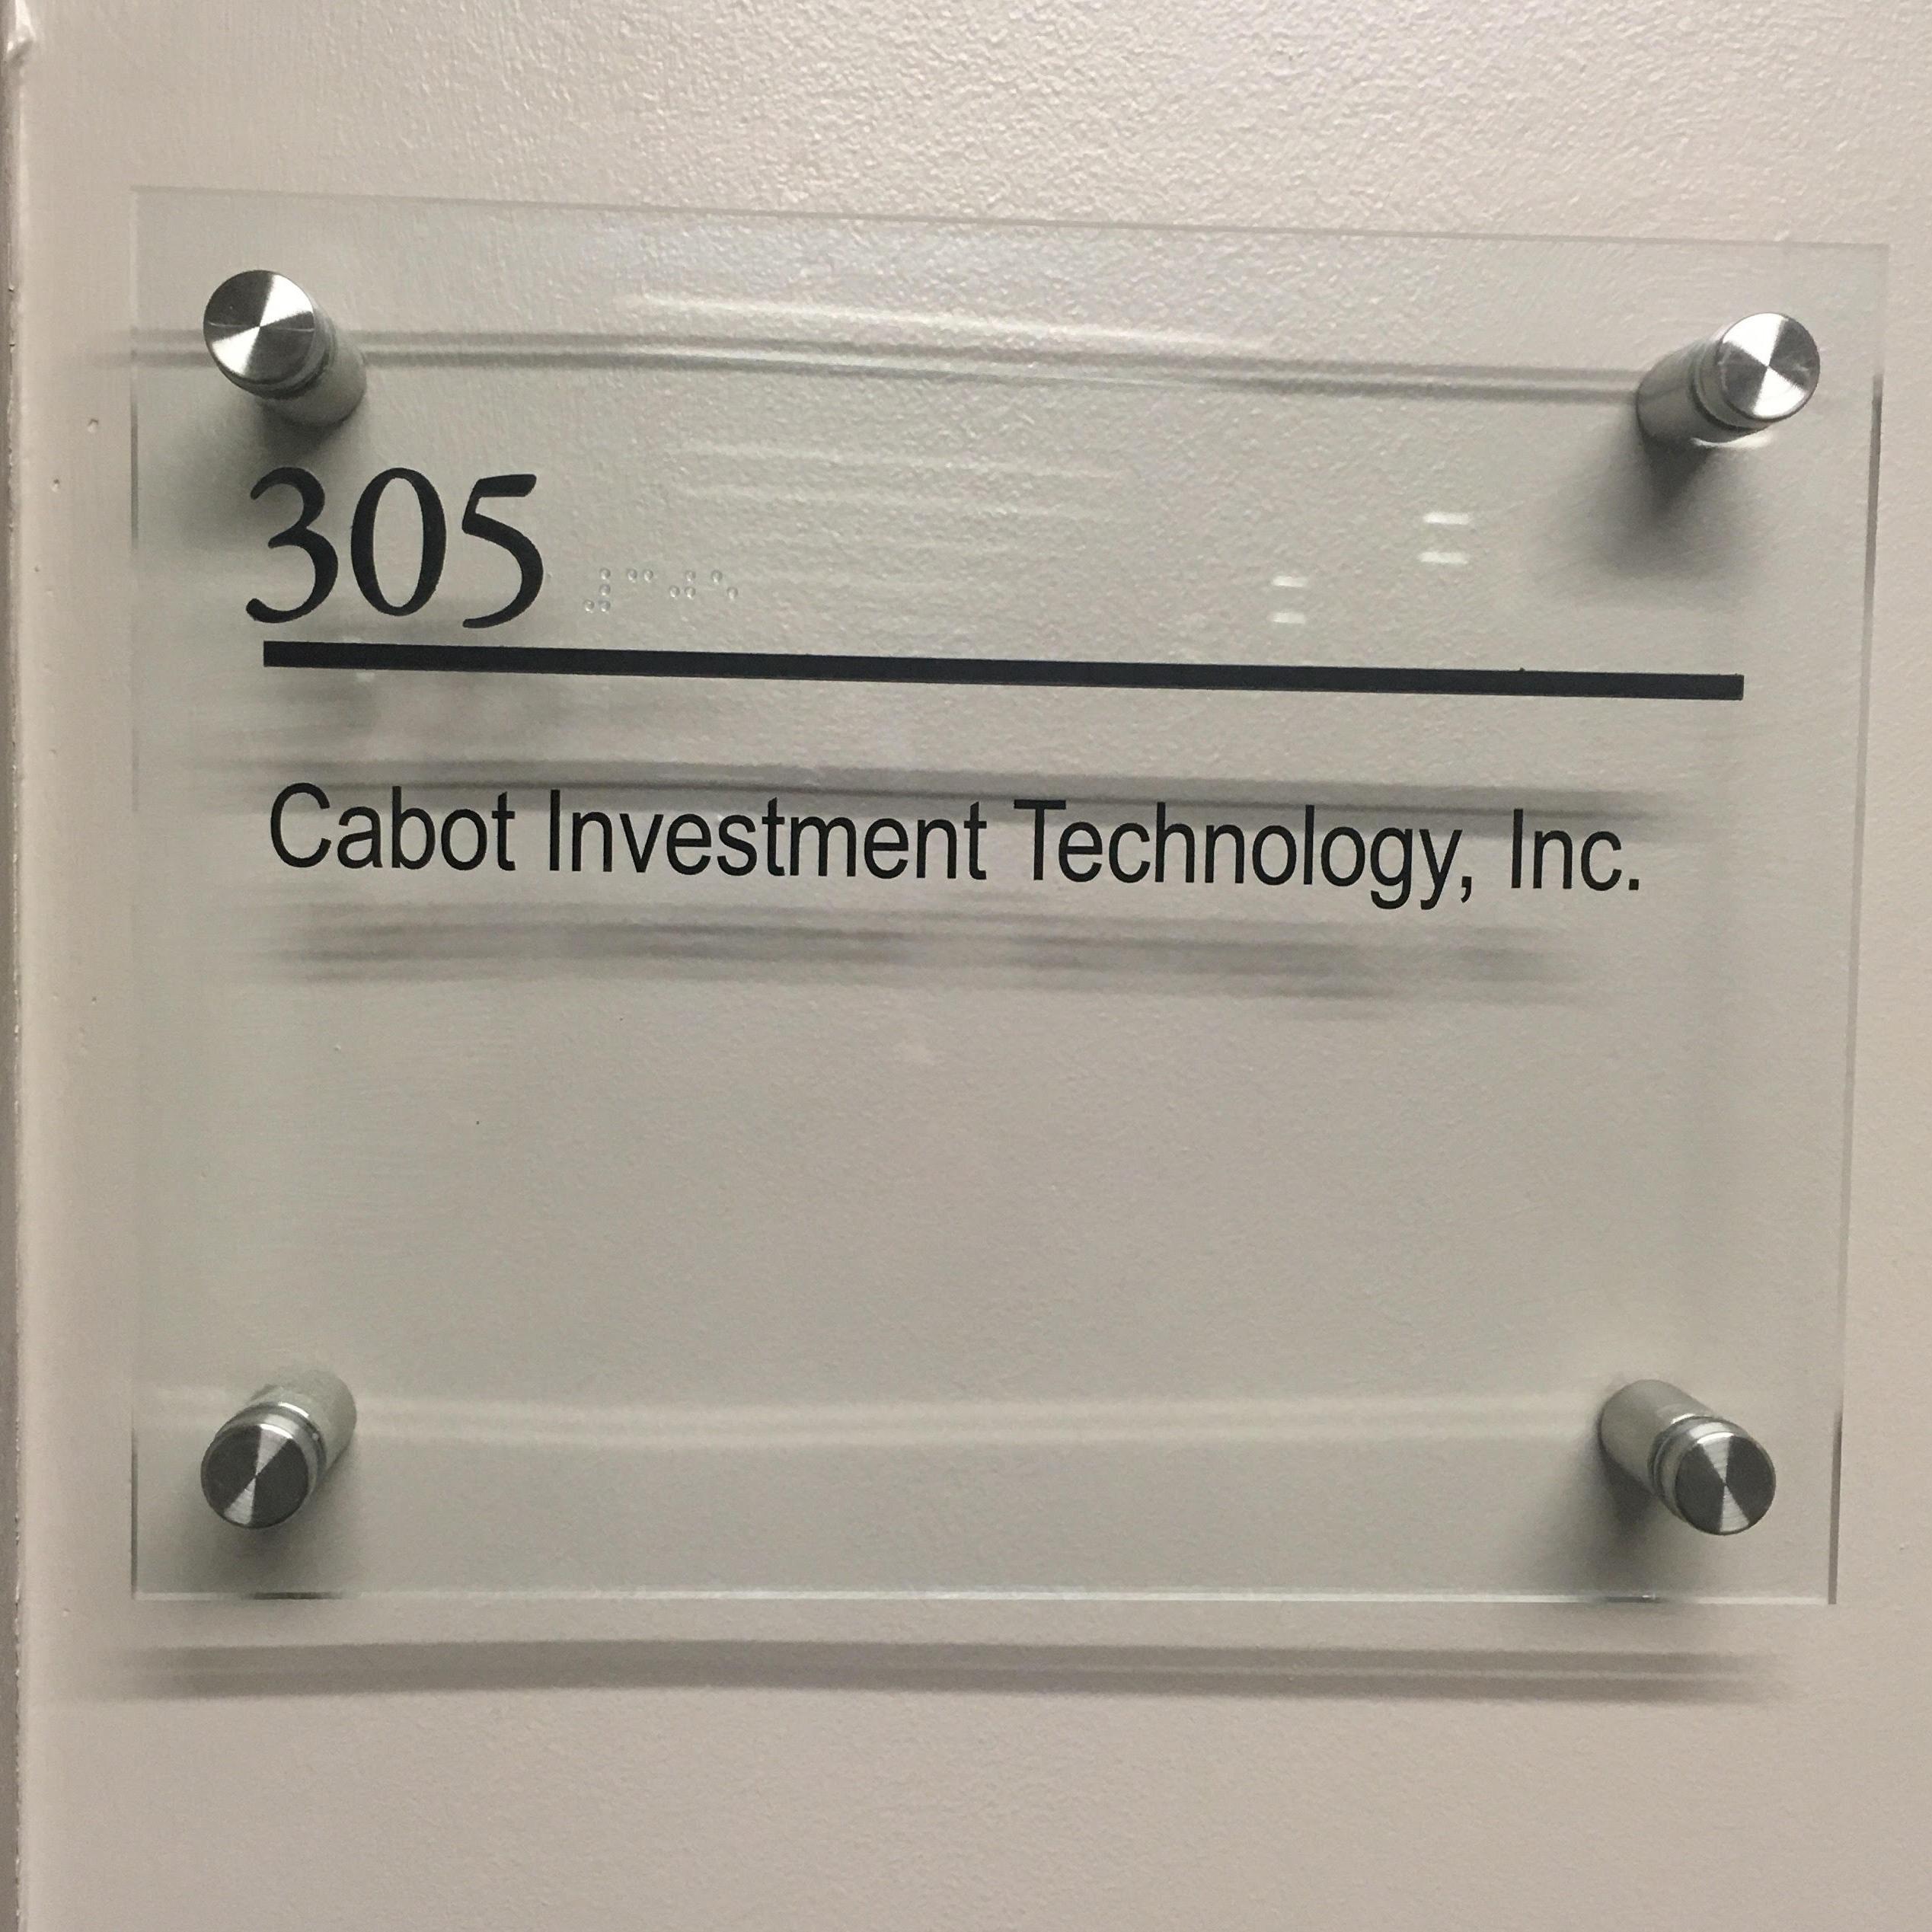 Cabot Investment Technology, Inc. Photo